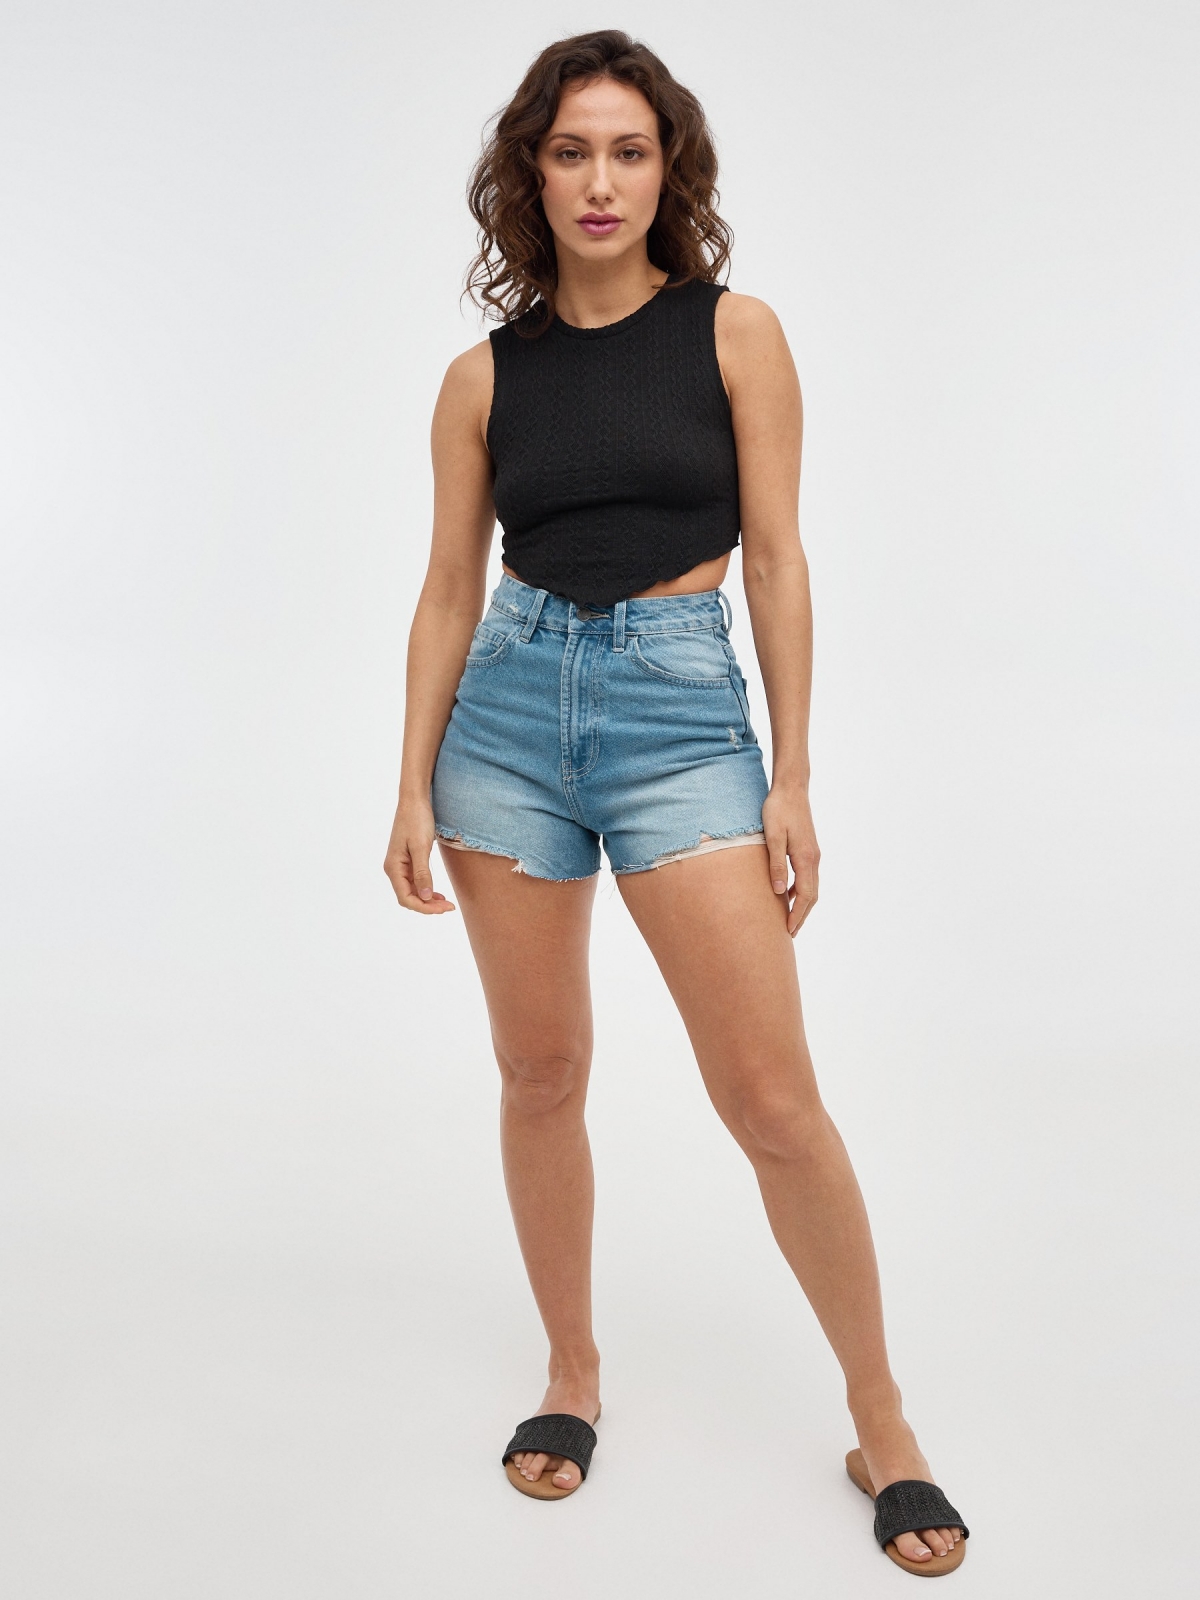 Black crop top with piping black front view